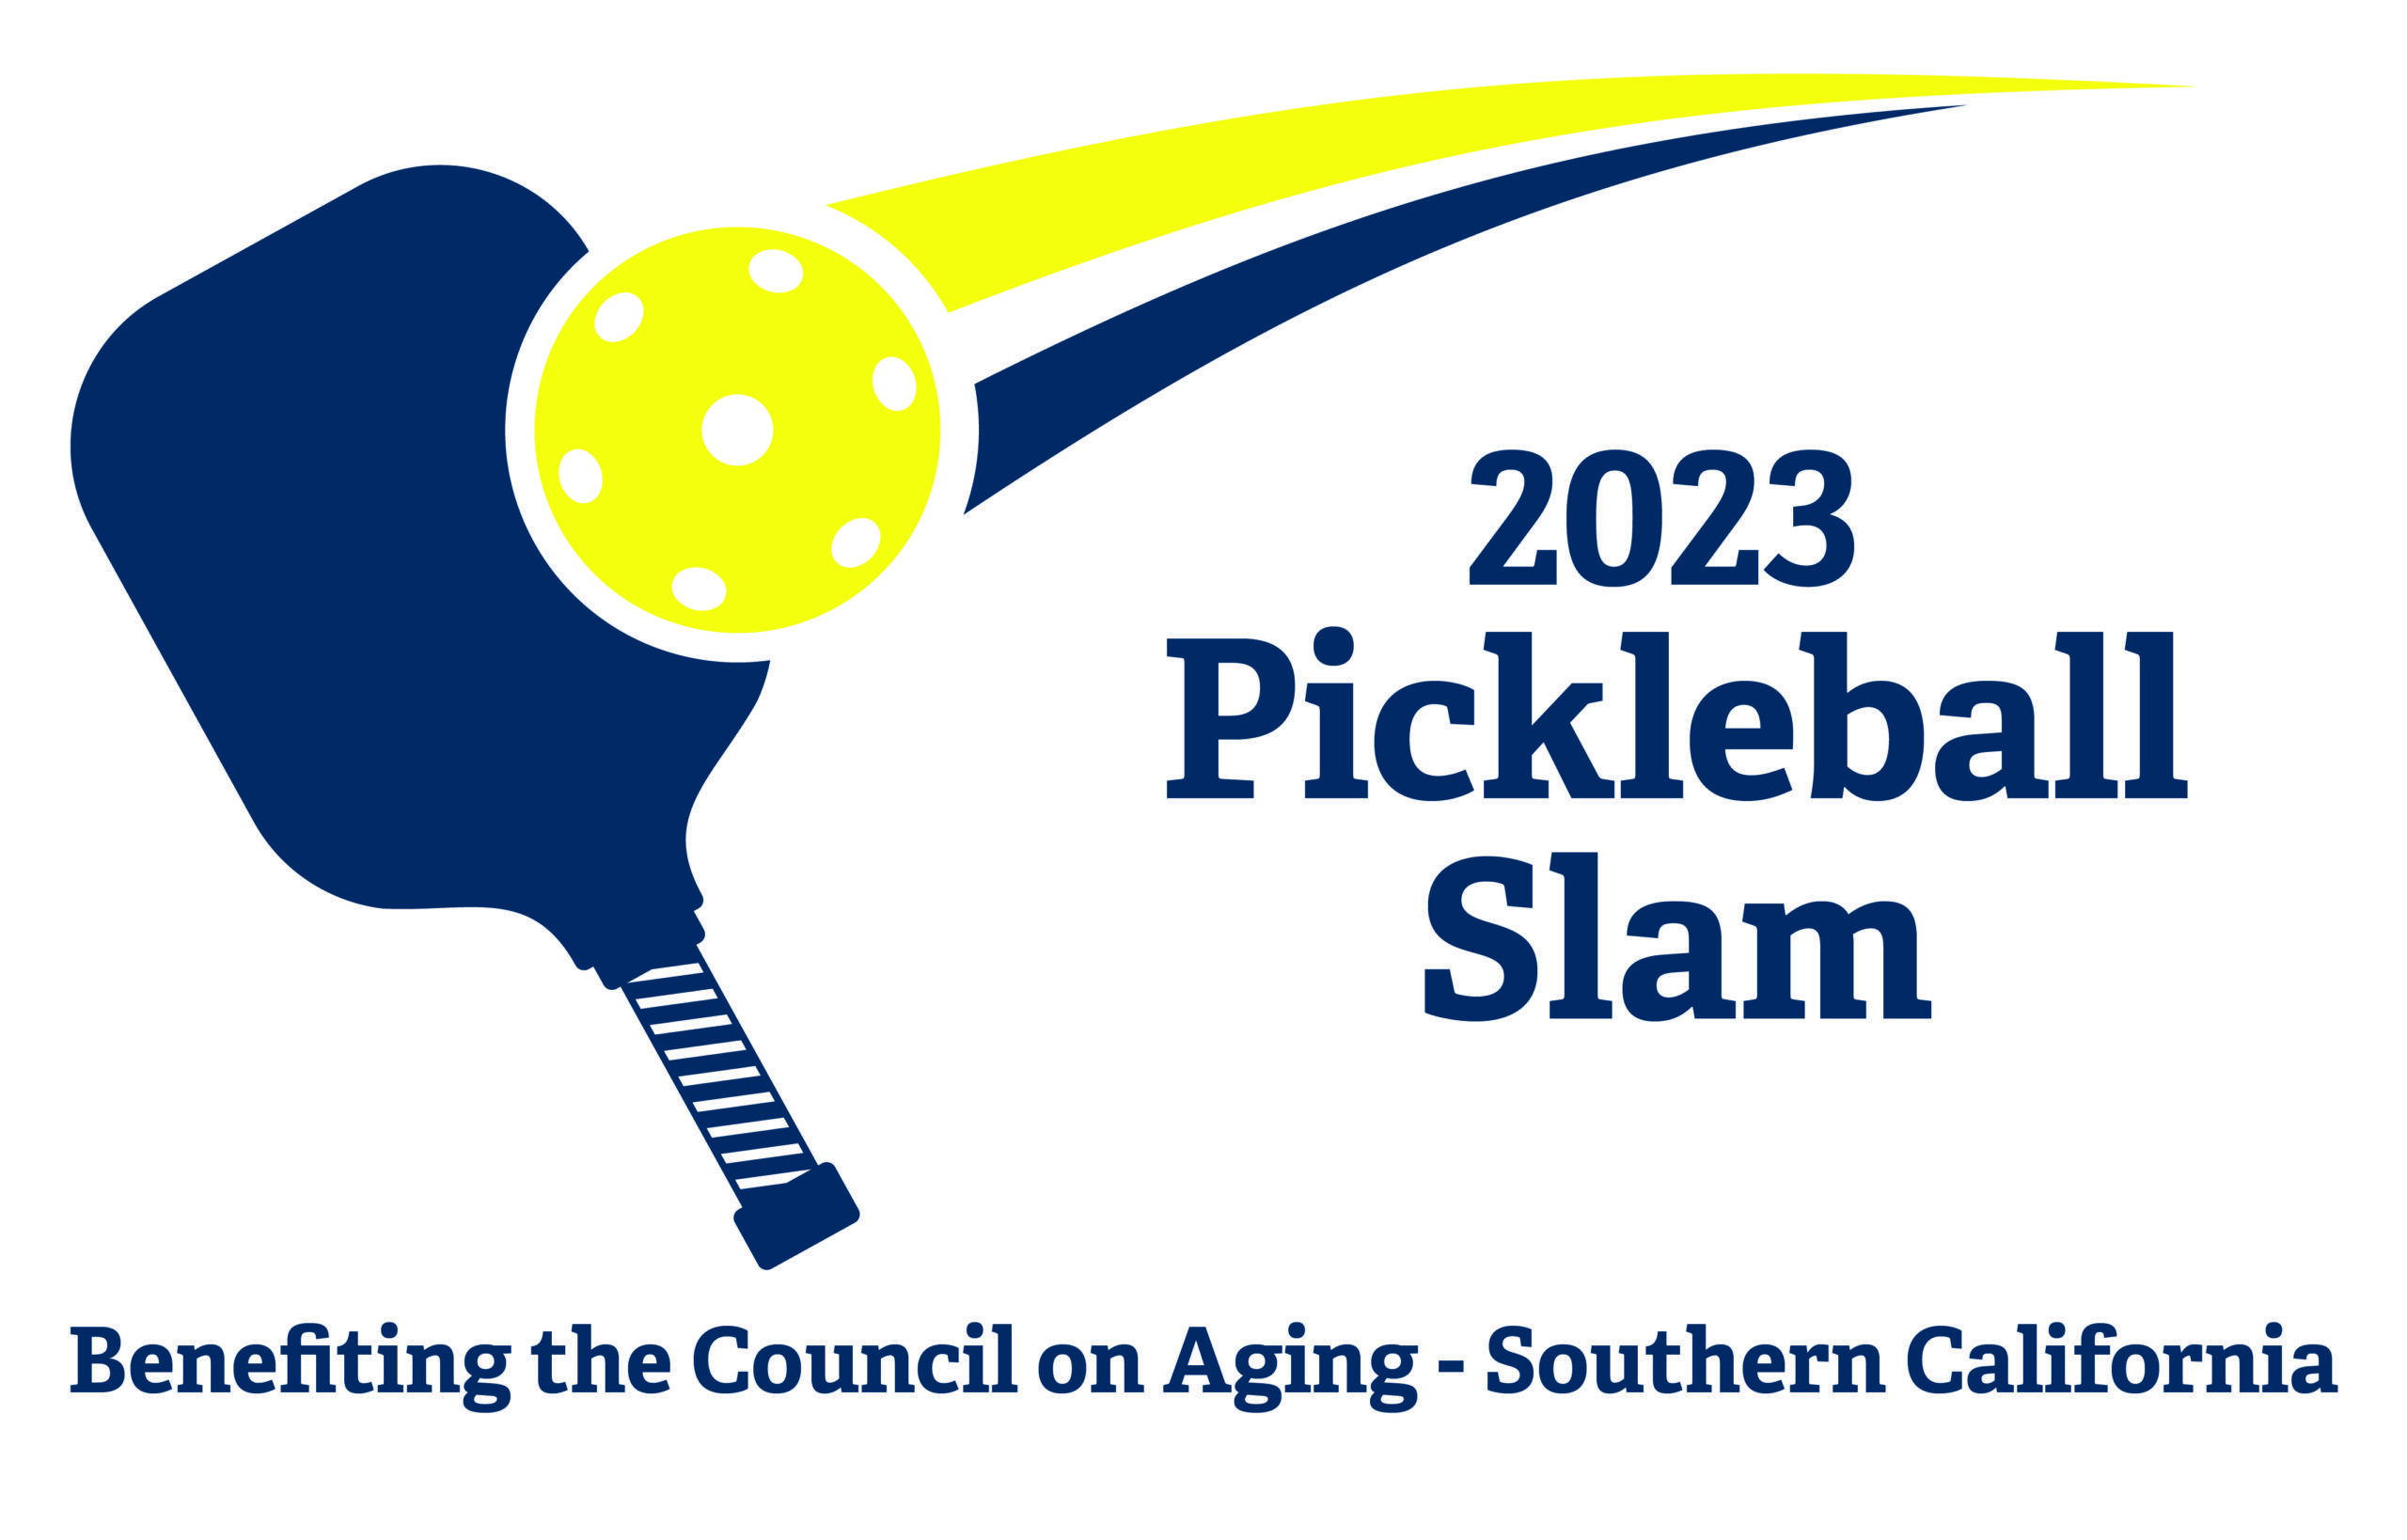 You're Invited! 2023 Pickleball Slam - Benefiting the Council on Aging - Southern California